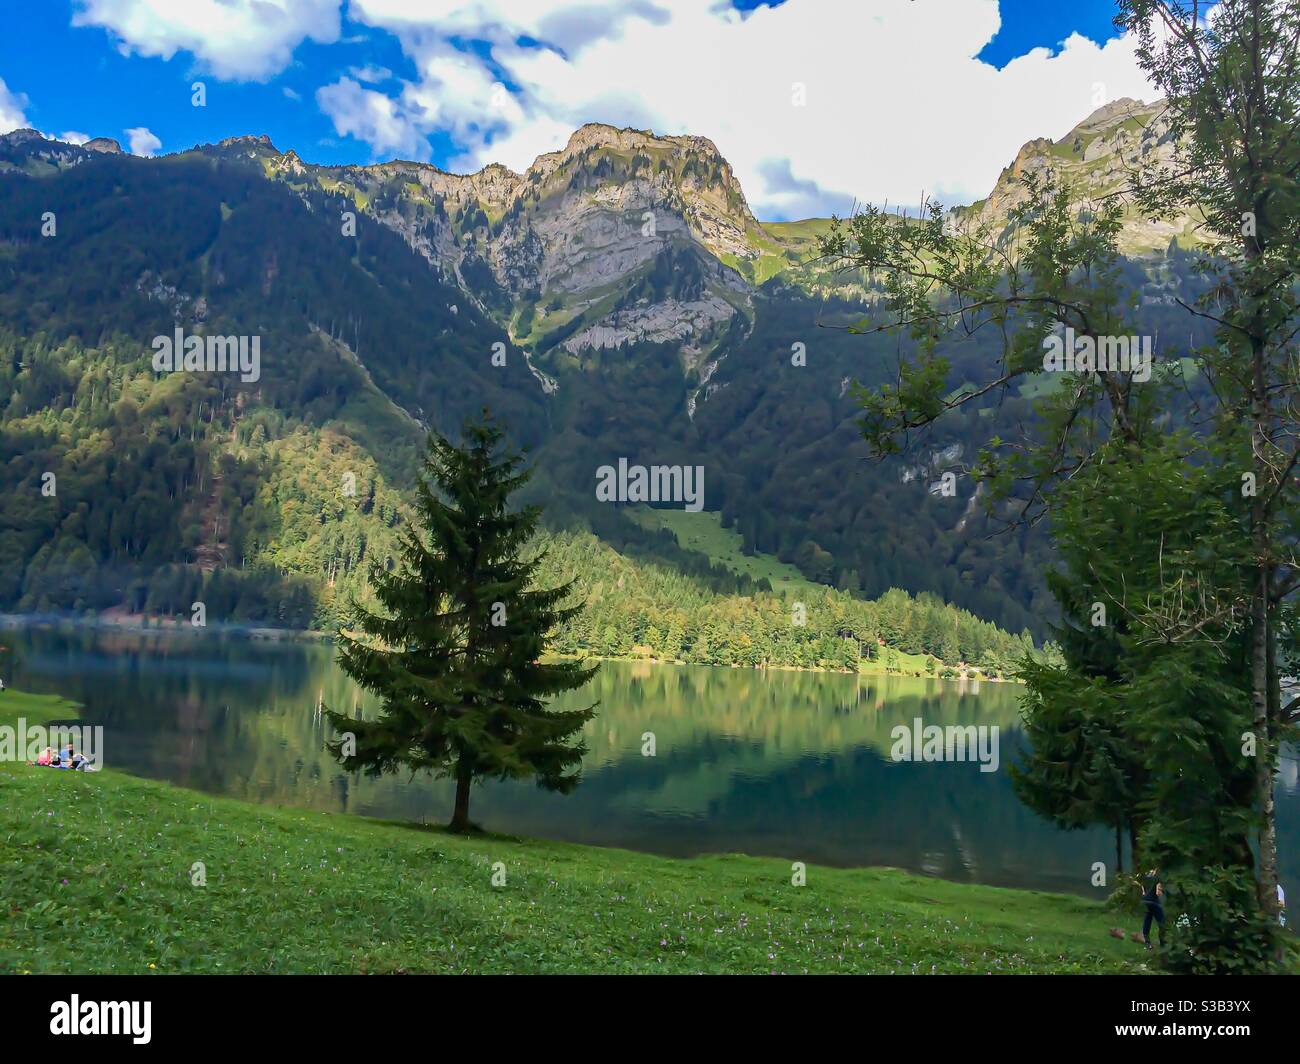 lake surrounded by mountain scene reflecting in water Stock Photo